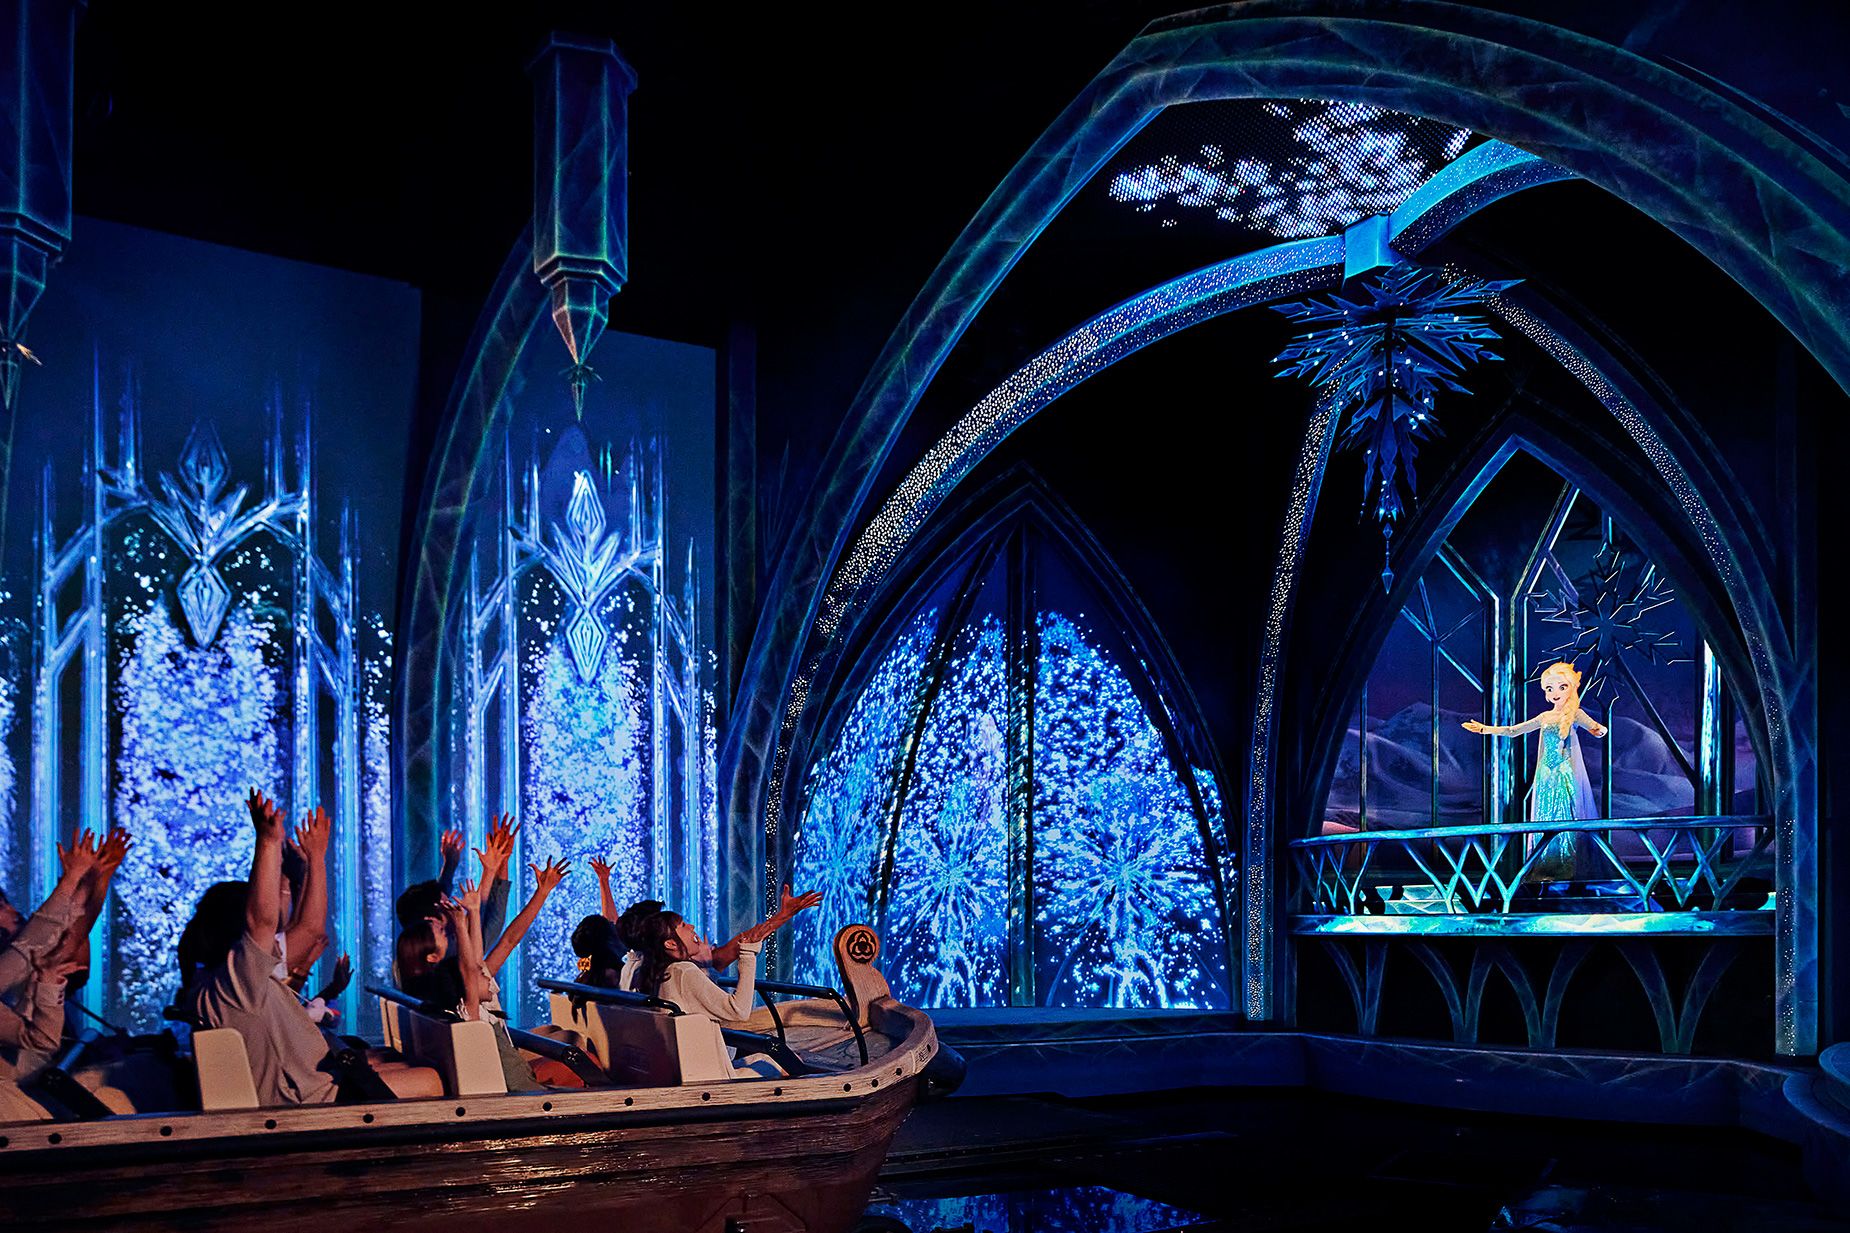 The Frozen Ever After ride features new animatronic figures.